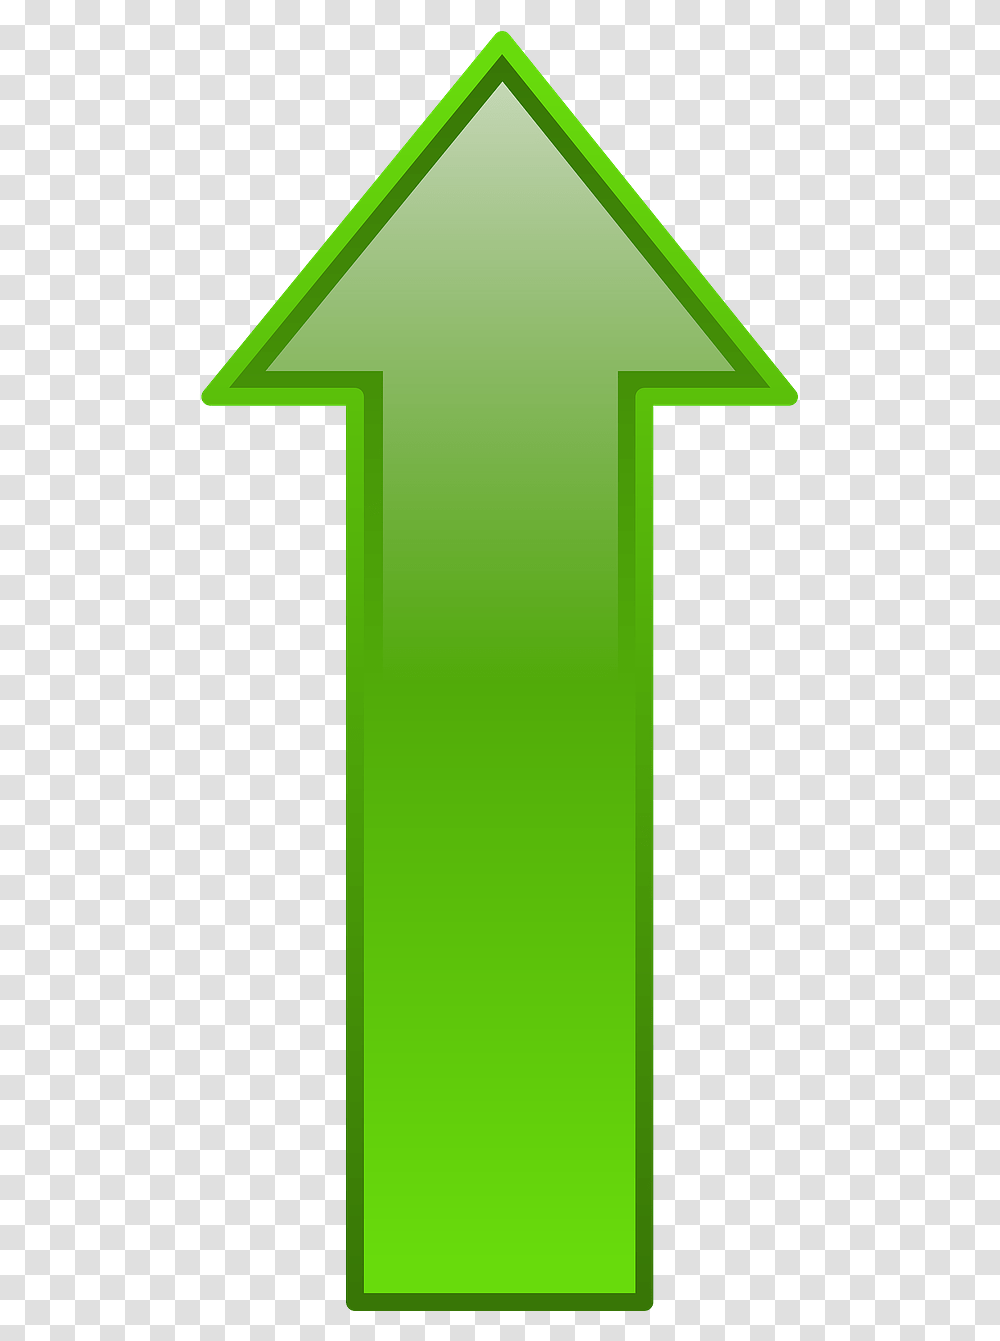 Progress Bar Meter Free Clipart Green Arrow Pointing Up, Number, Mailbox Transparent Png